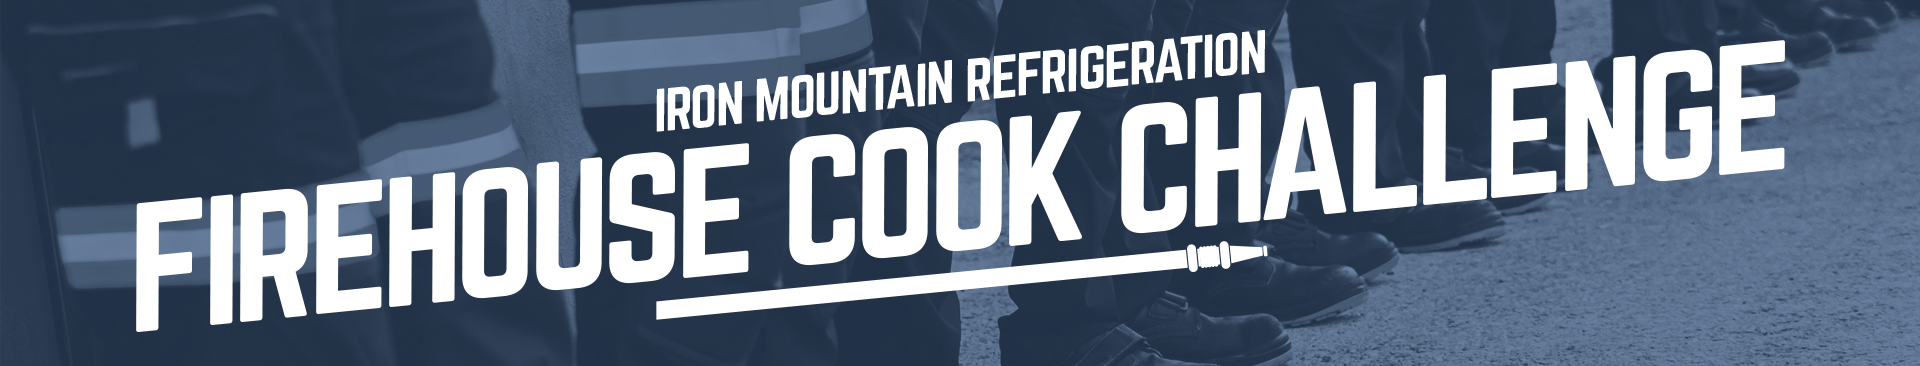 Iron Mountain Refrigeration Firehouse Cook Challenge